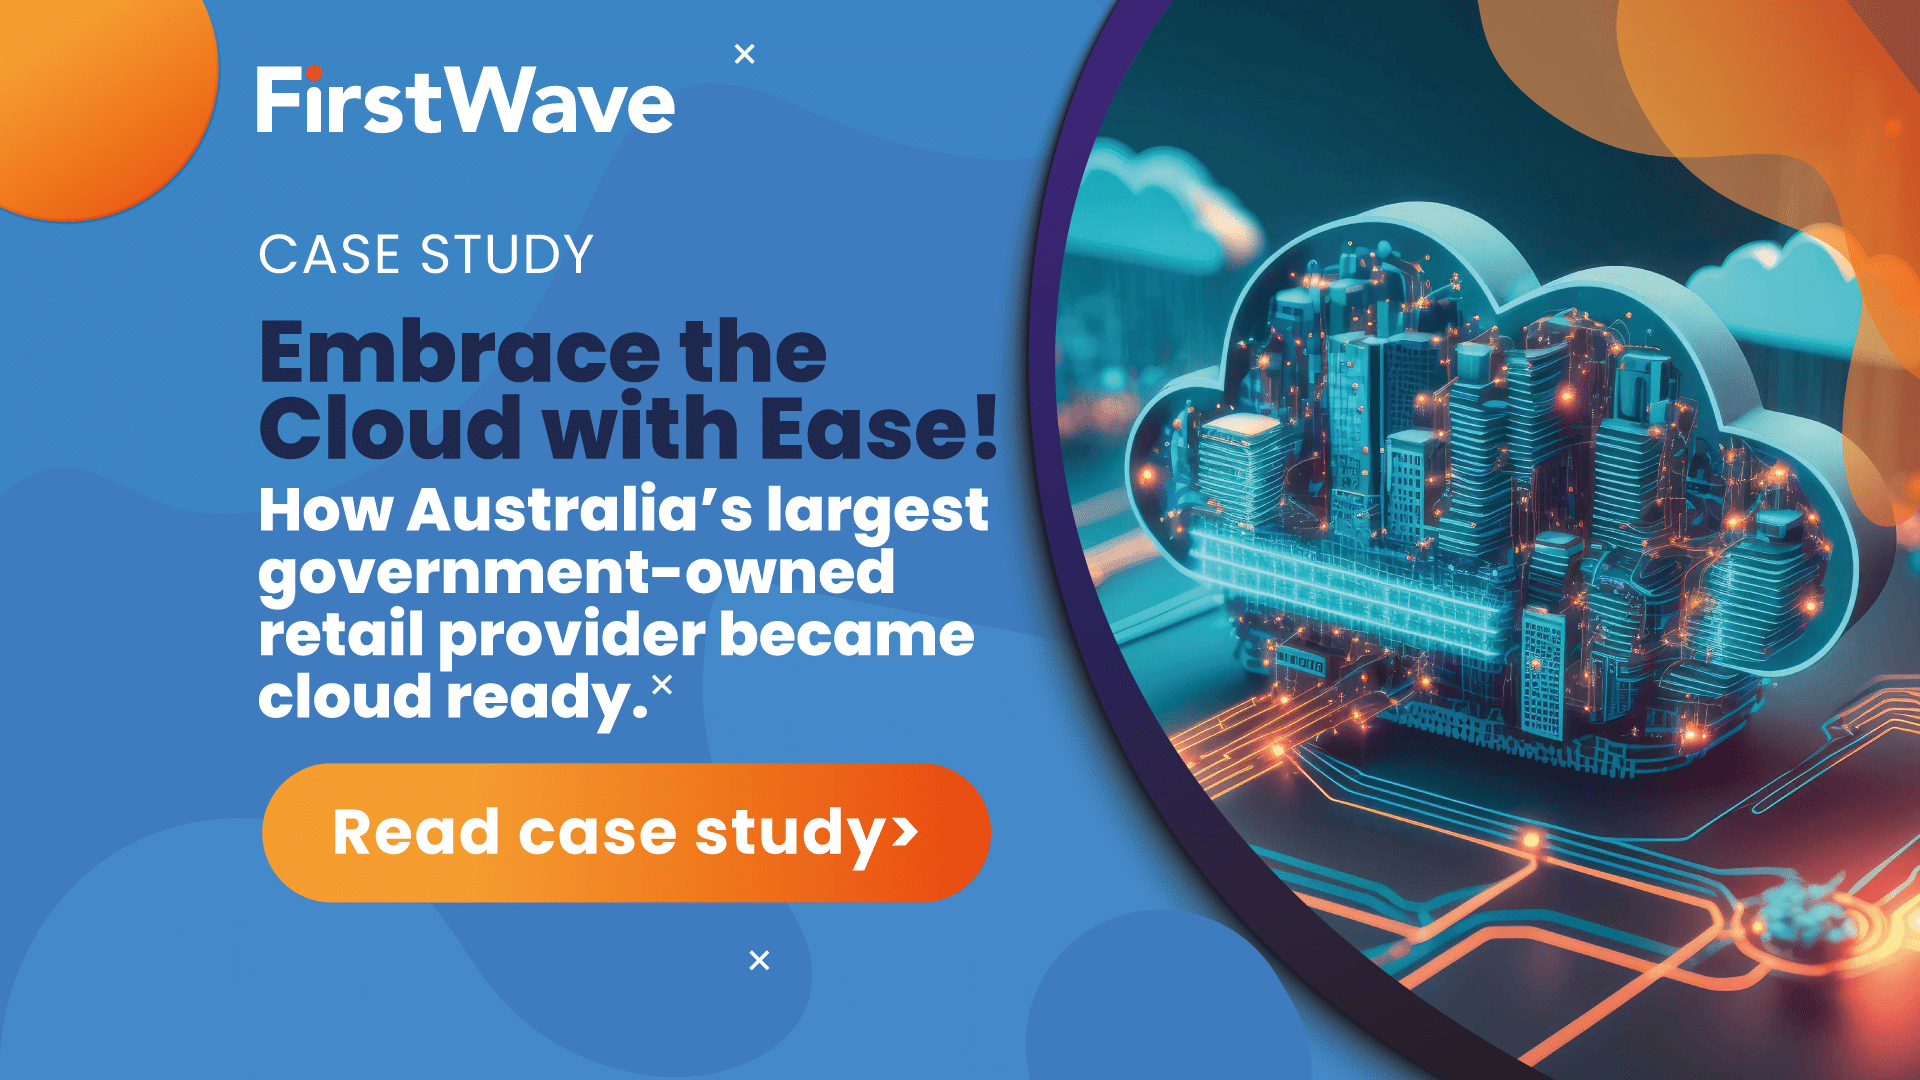 FirstWave Seamless migration of the entire email content to the cloud Australia’s postal service